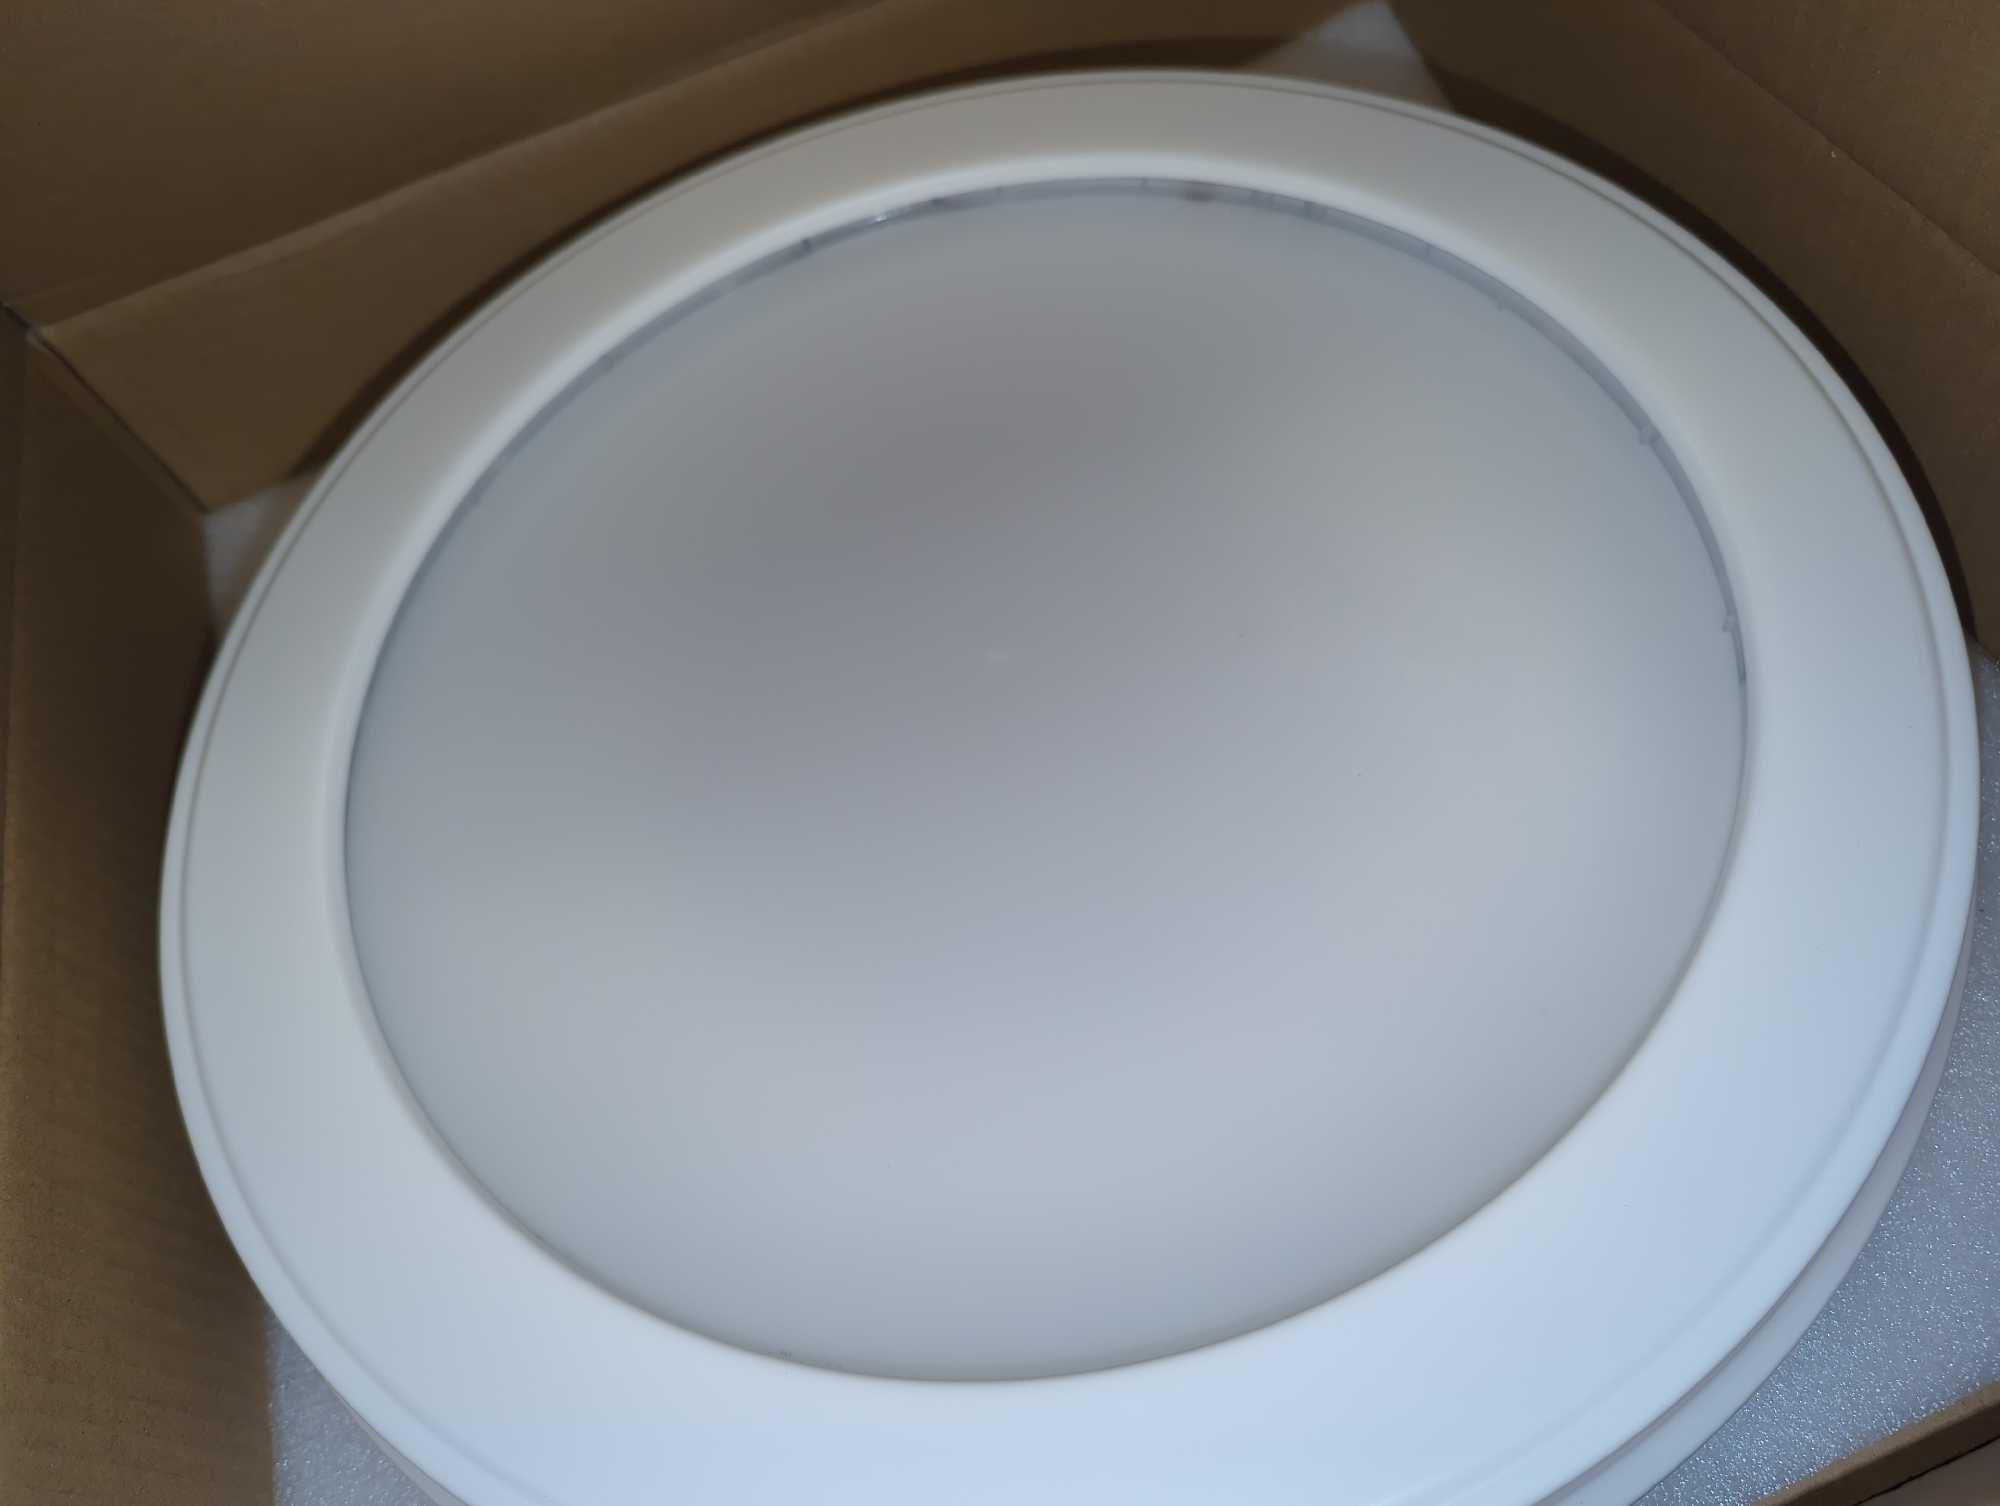 Broan-NuTone Roomside Series Decorative White 80 CFM Ceiling Bathroom Exhaust Fan with Round LED